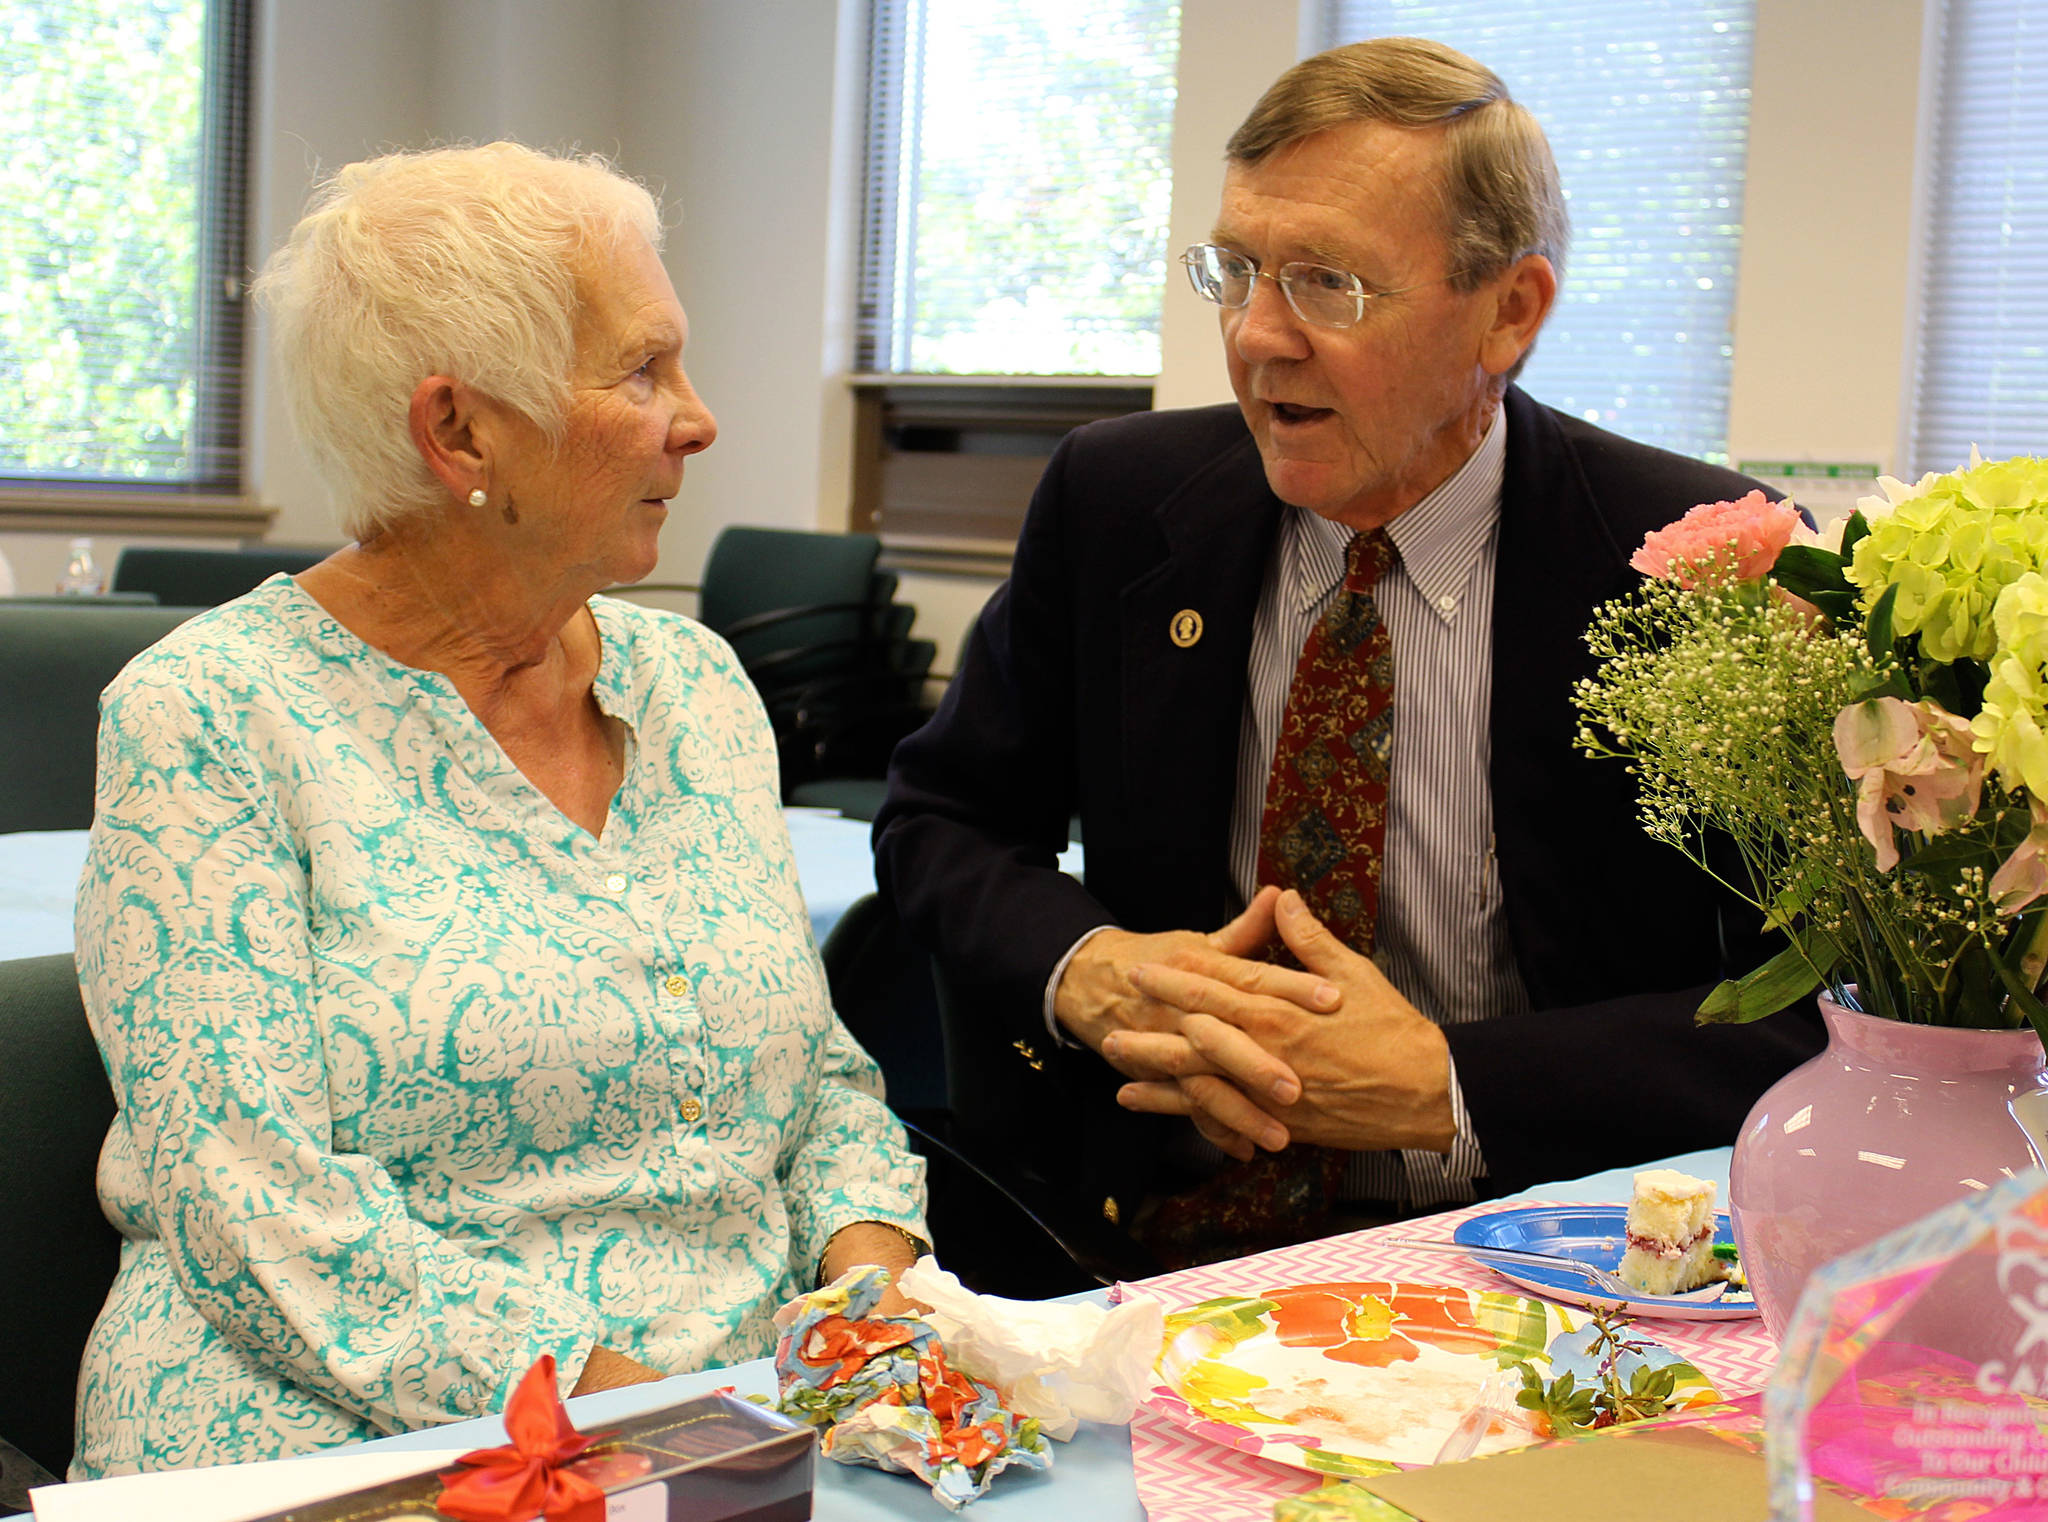 Joan Caldwell chats with Superior Court Judge Alan Hancock at a retirement party recognizing Caldwell’s long service as a volunteer for CASA, a program that advocates for children who have been removed from homes because of abuse or neglect allegations. A service award in her honor was established. Photo by Patricia Guthrie/Whidbey News Times